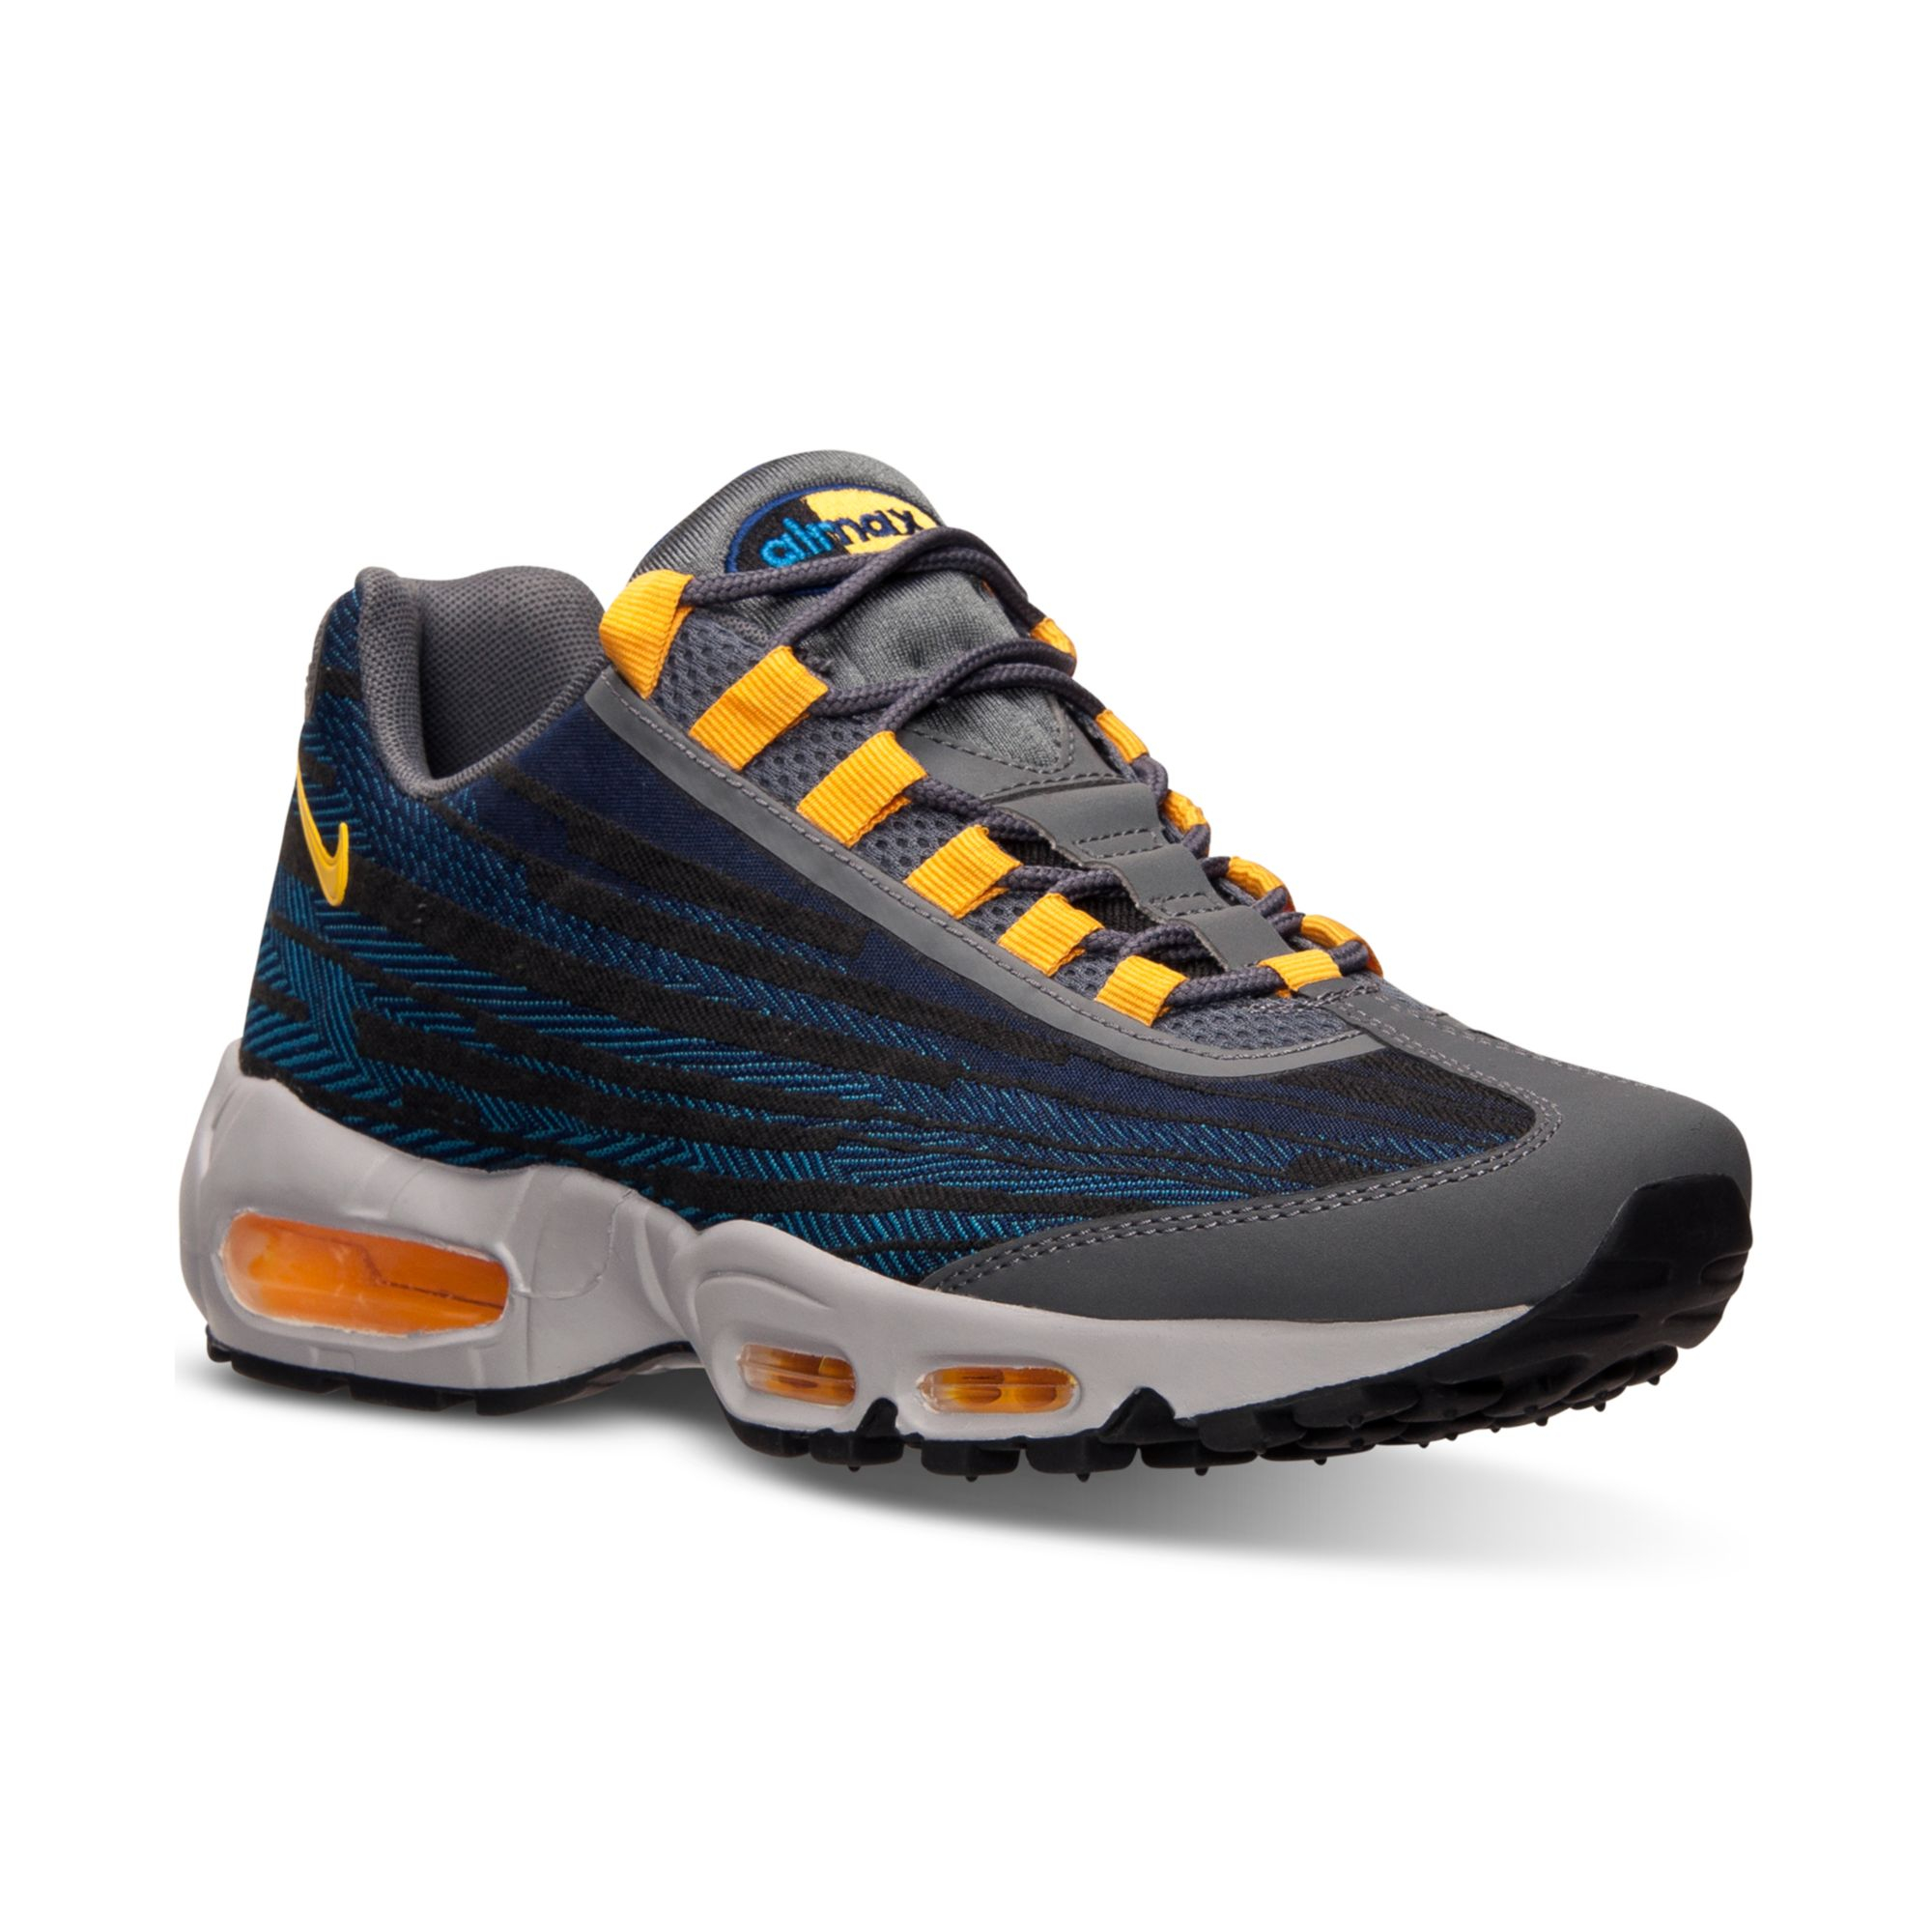  Nike  Mens Air Max 95 Jcrd Running Sneakers From Finish 